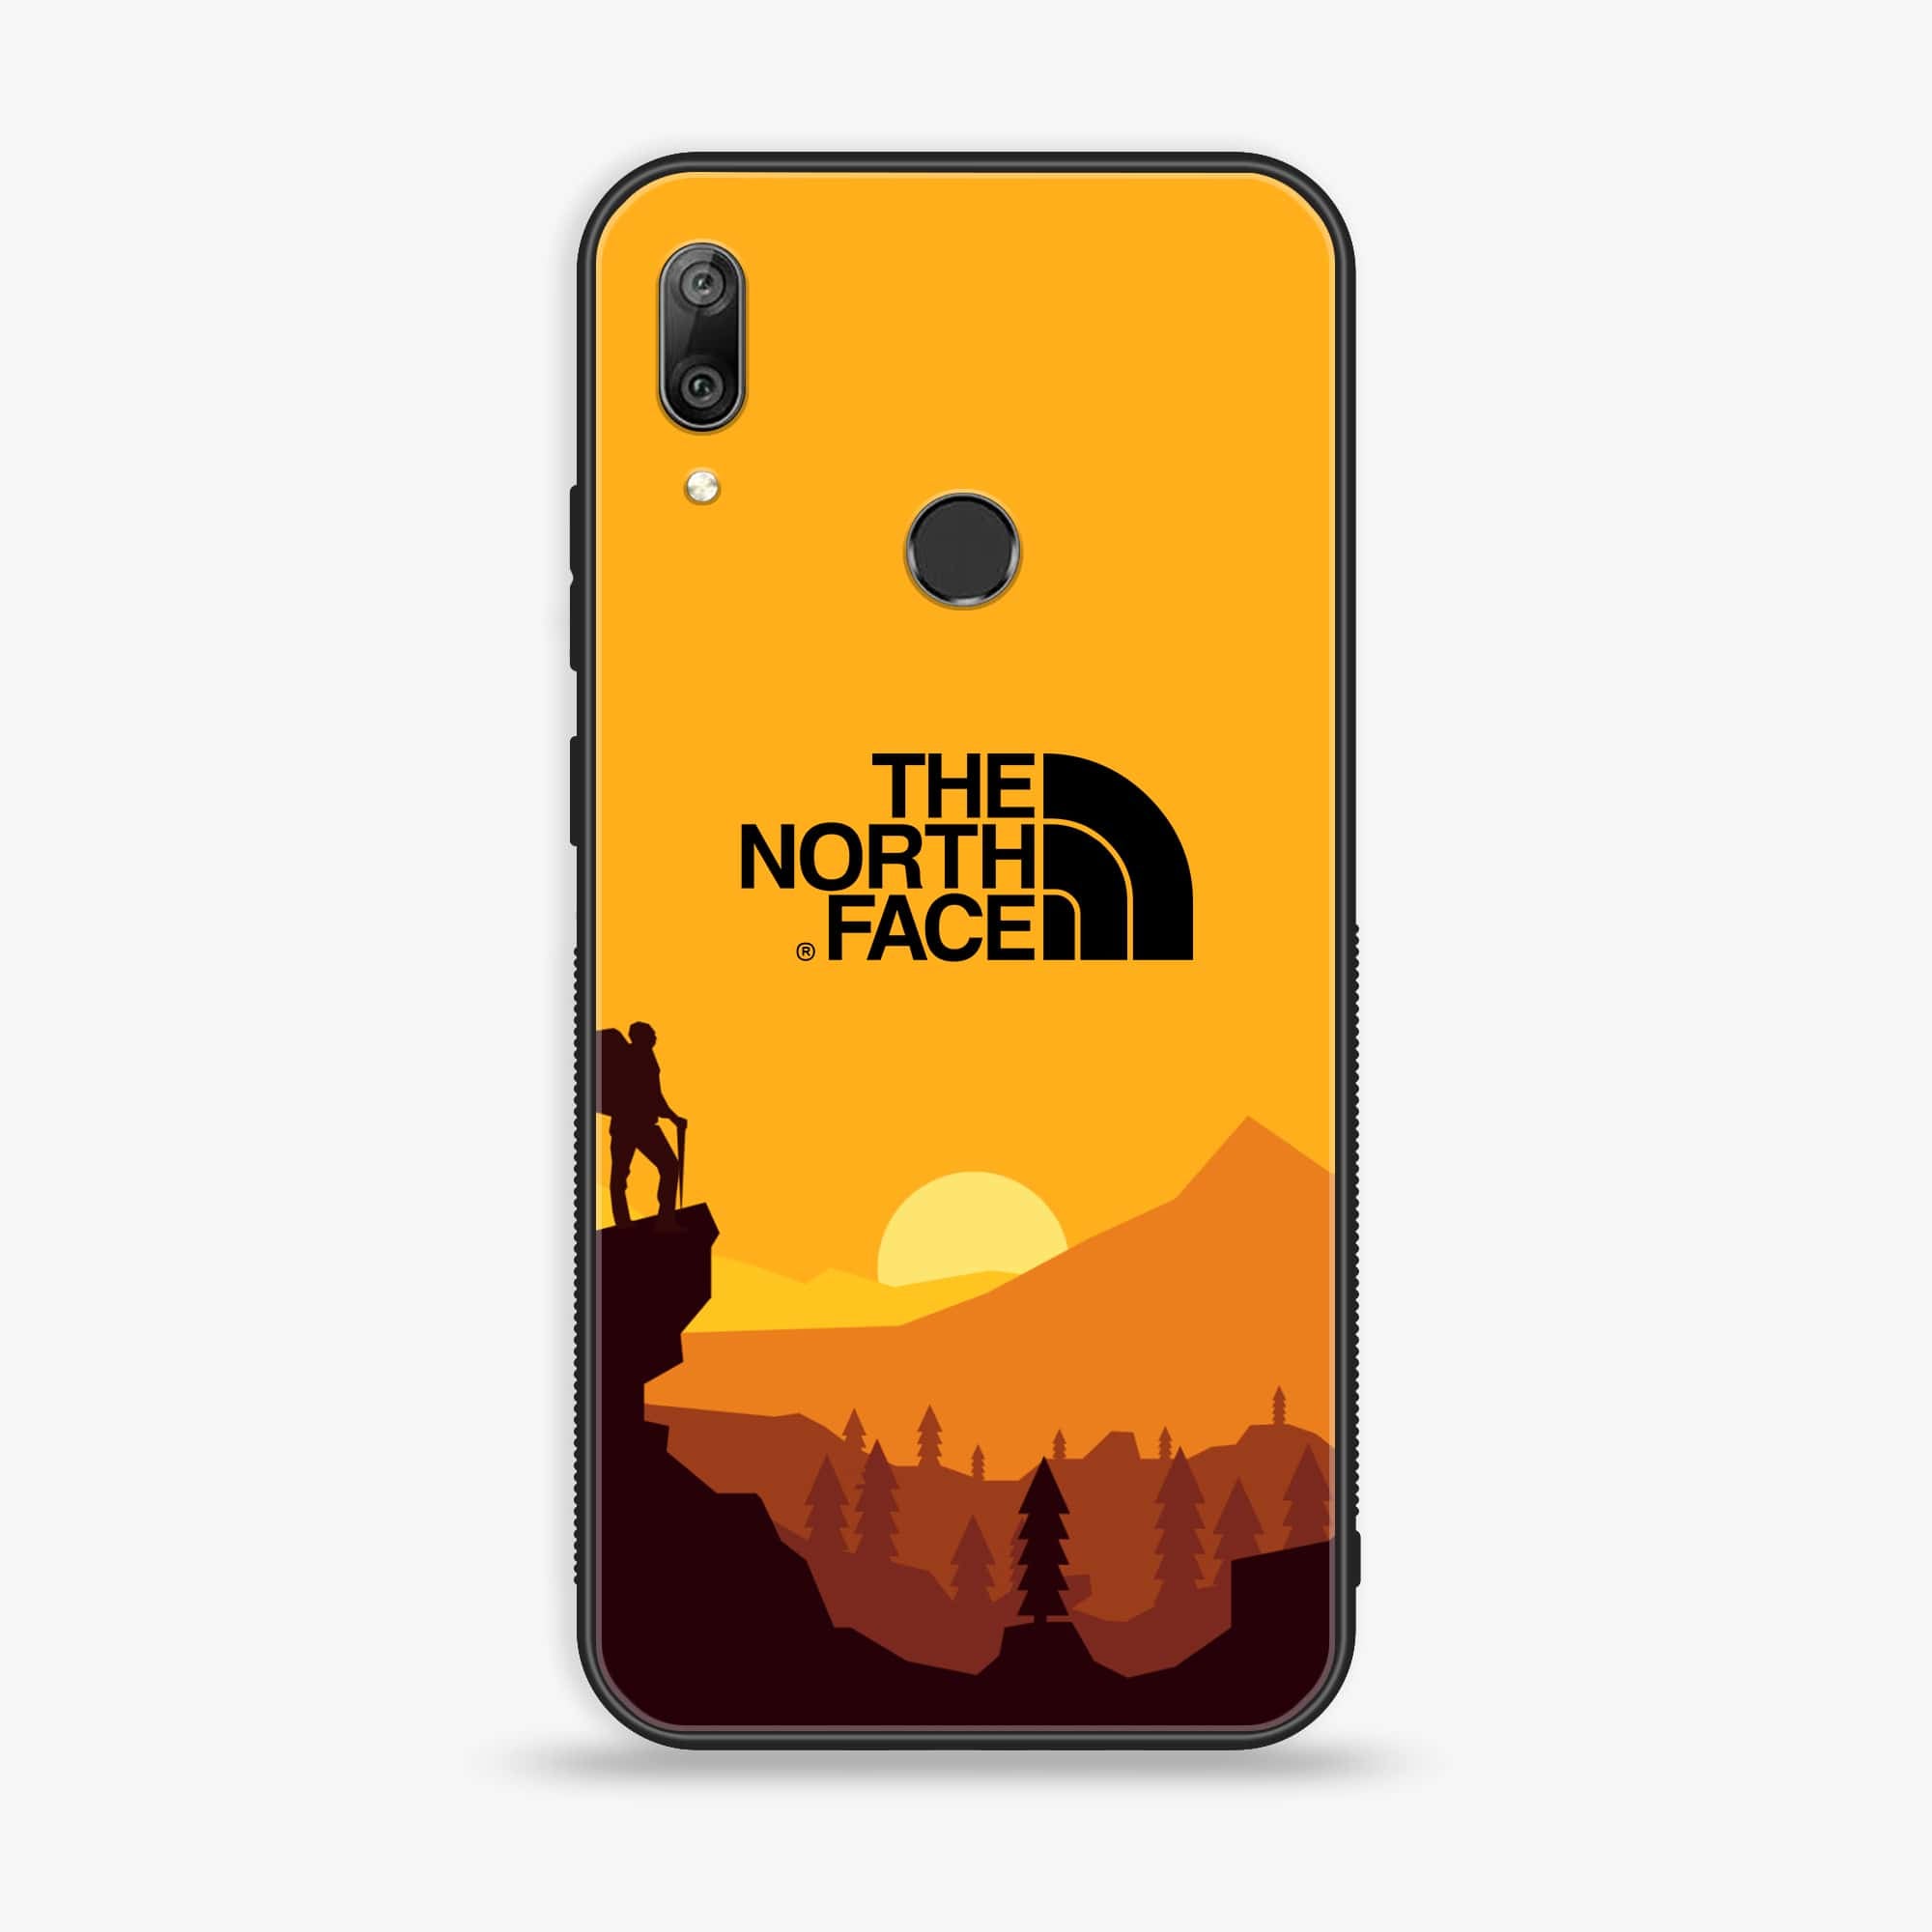 Huawei Y7 Prime (2019) - The North Face Series - Premium Printed Glass soft Bumper shock Proof Case